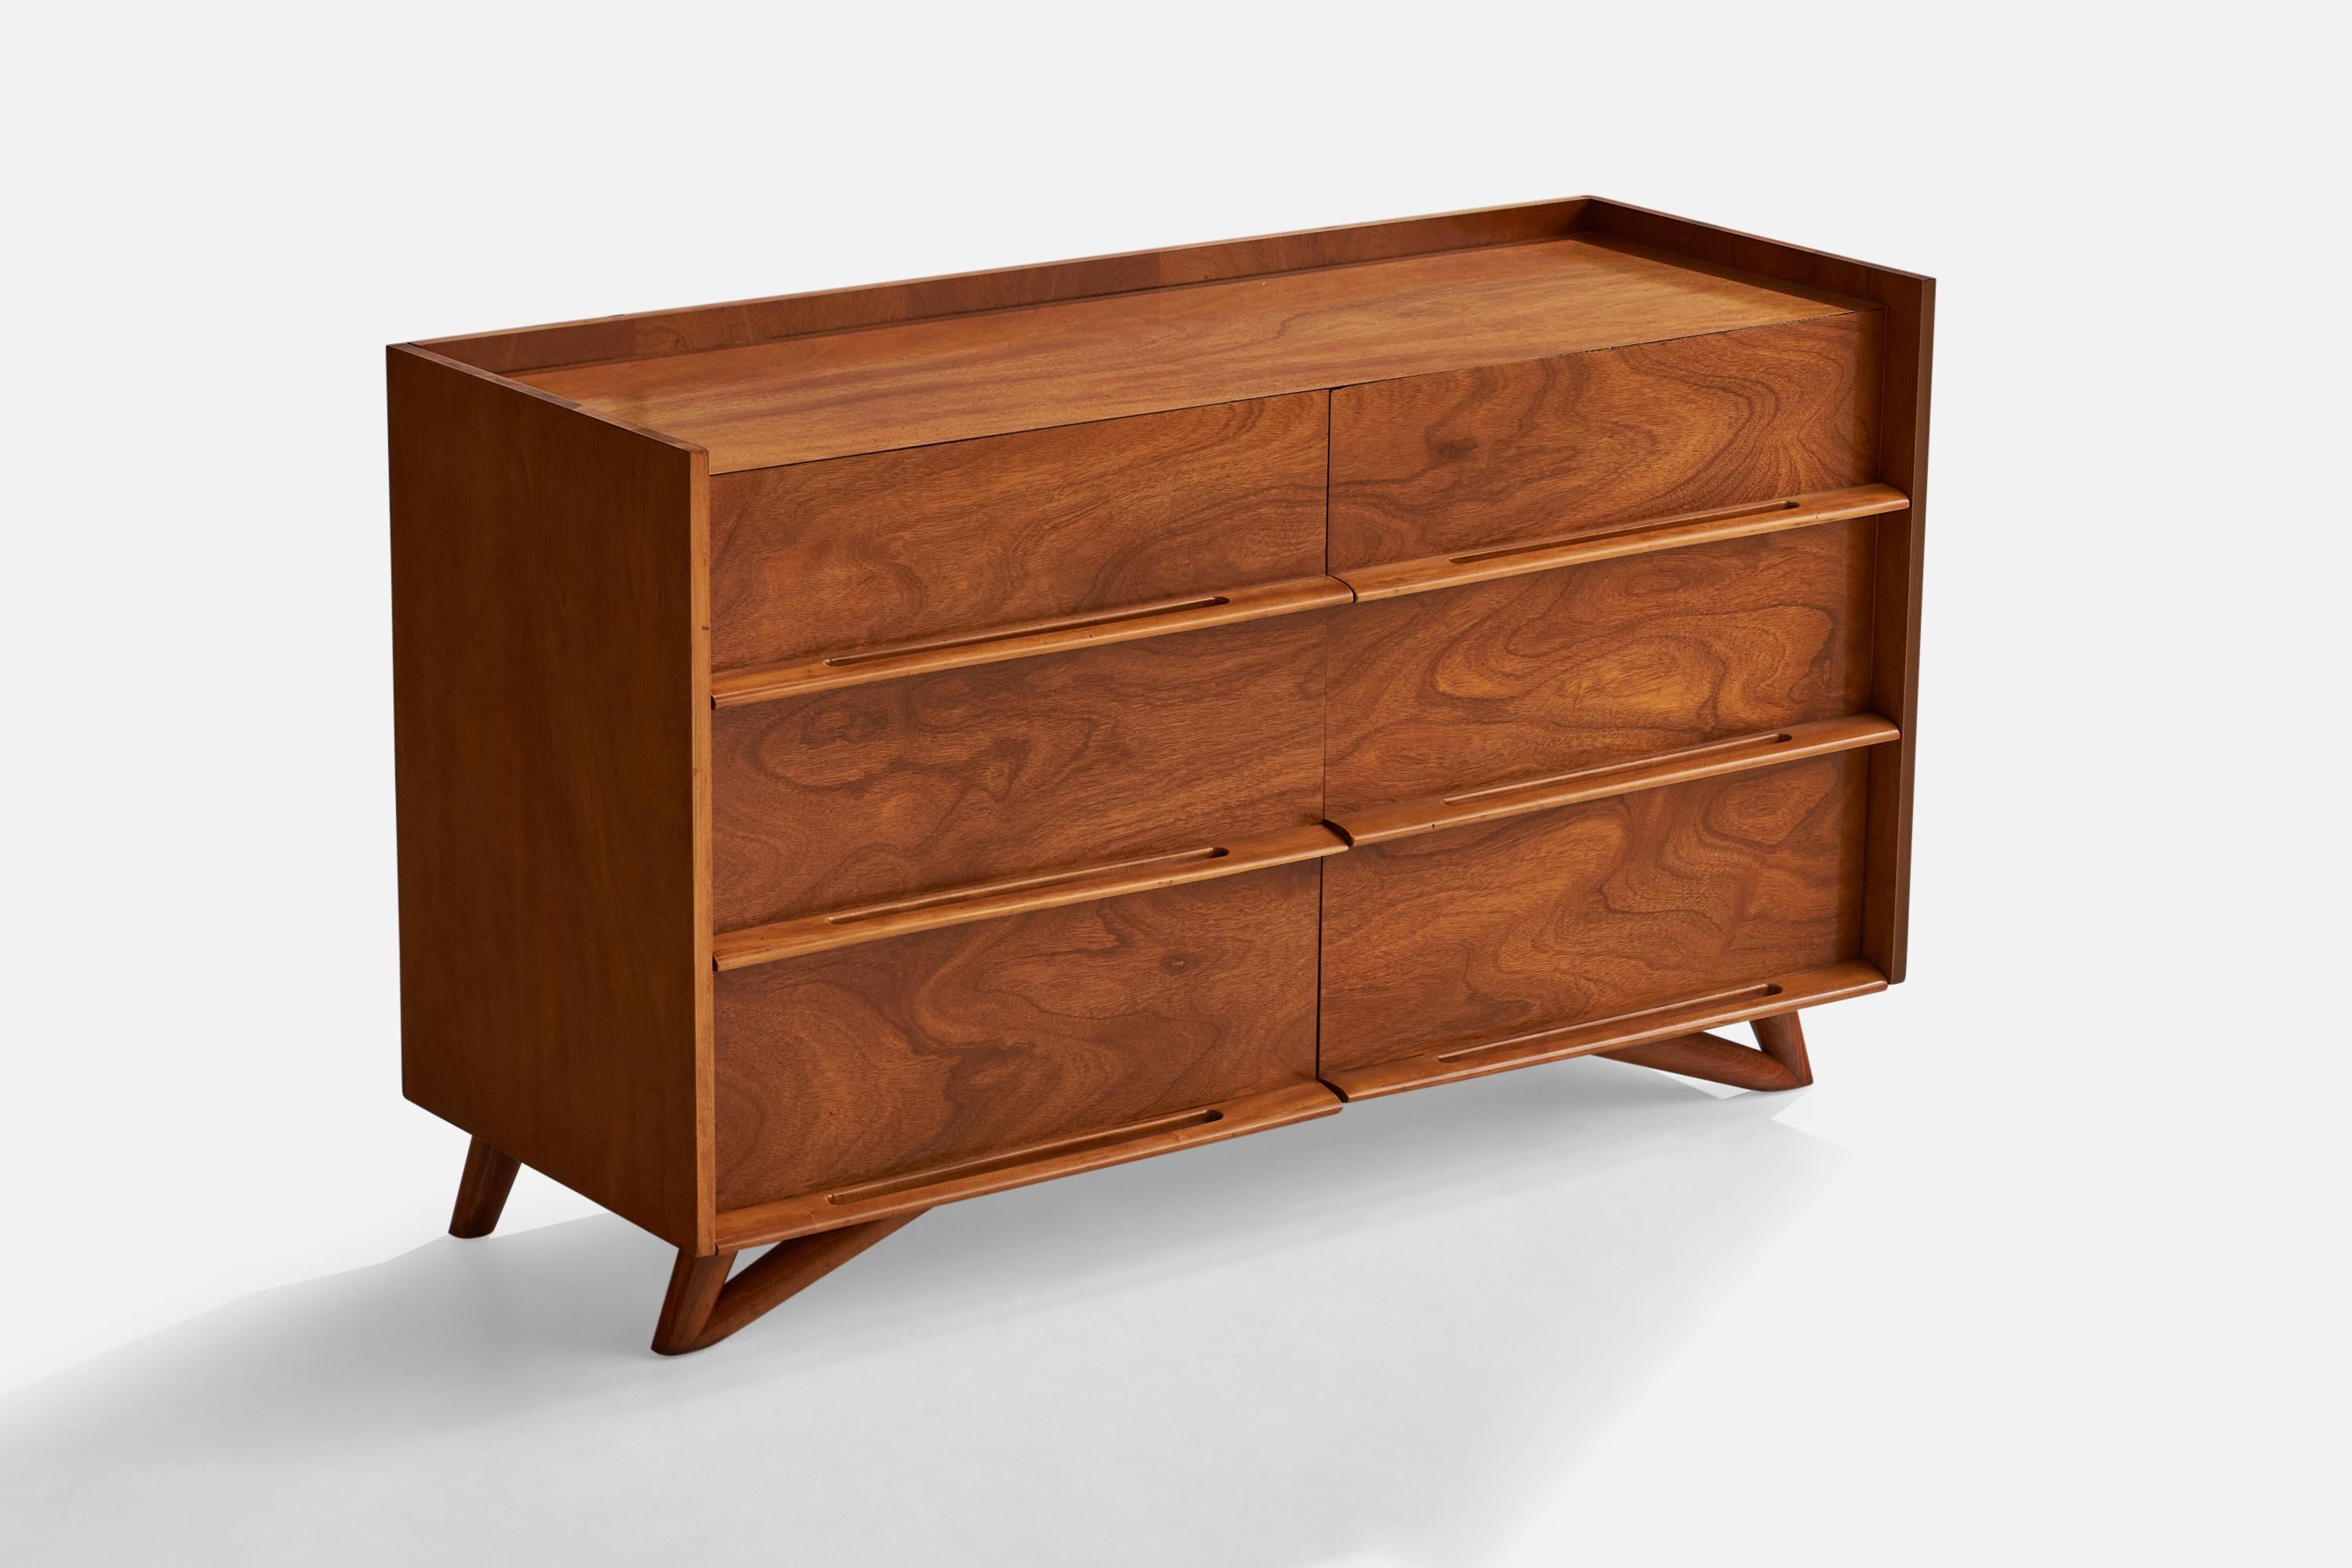 A rosewood dresser designed and produced in the US, 1950s.